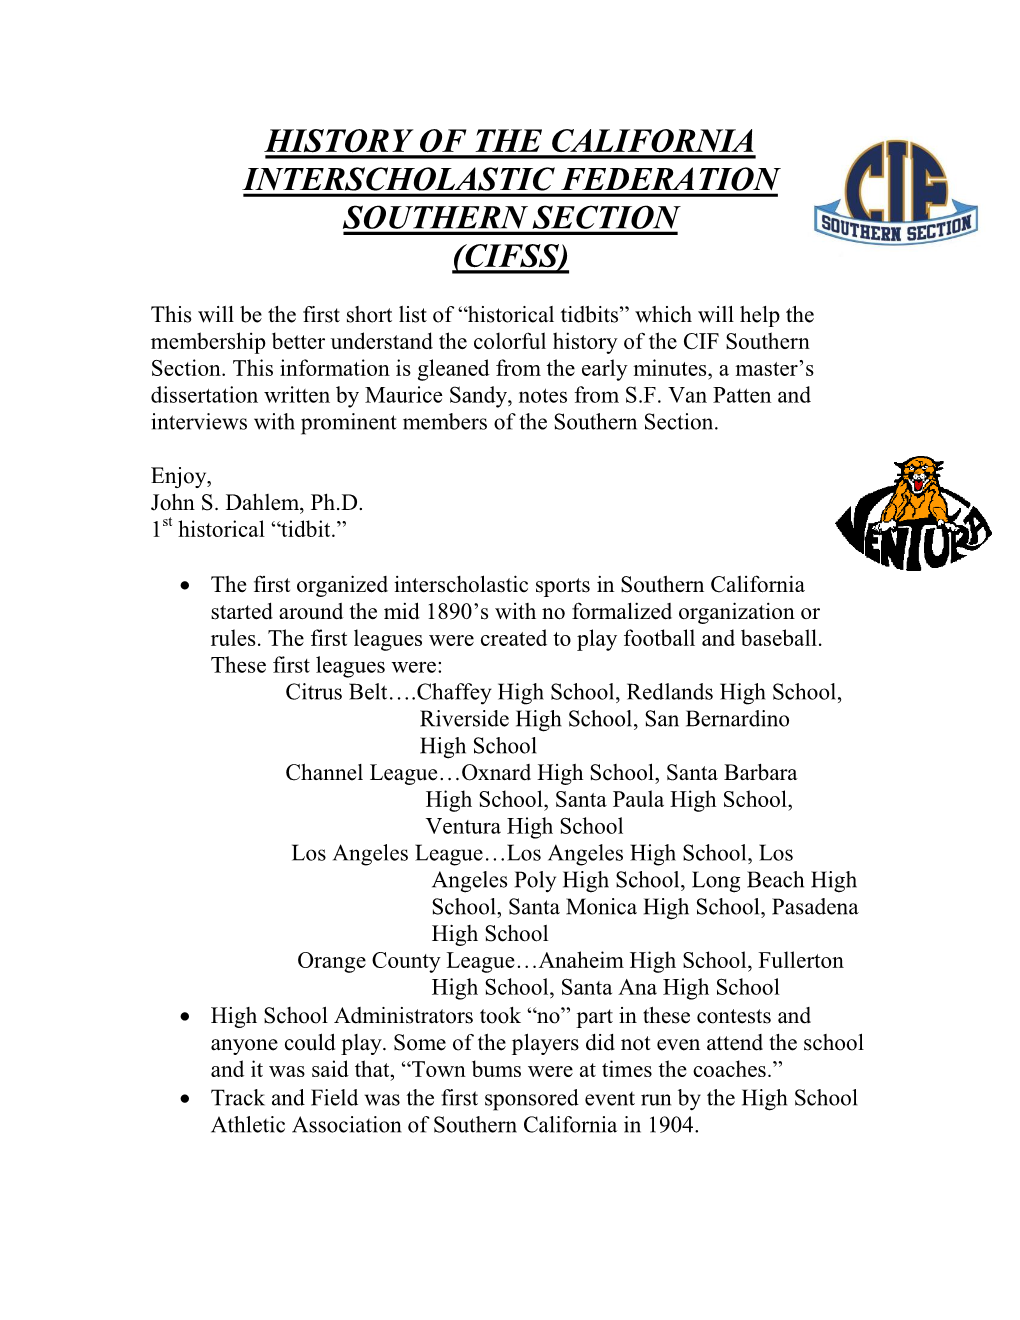 History of the California Interscholastic Federation Southern Section